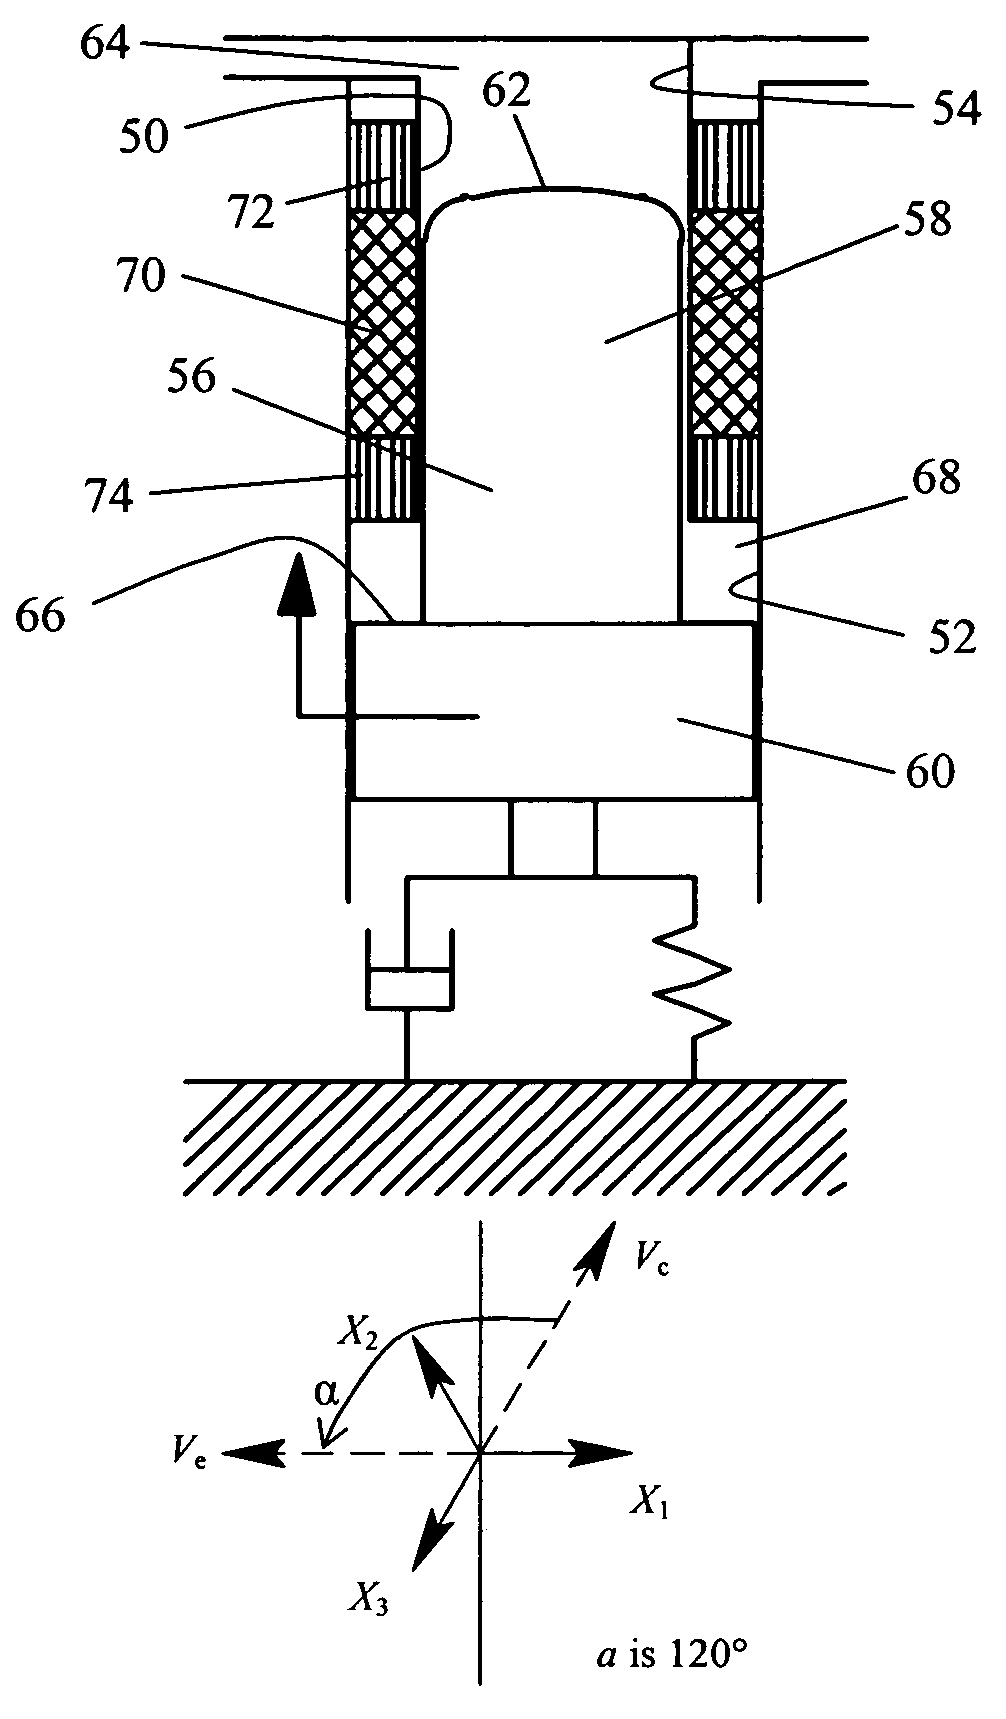 Multiple-cylinder, free-piston, alpha configured stirling engines and heat pumps with stepped pistons